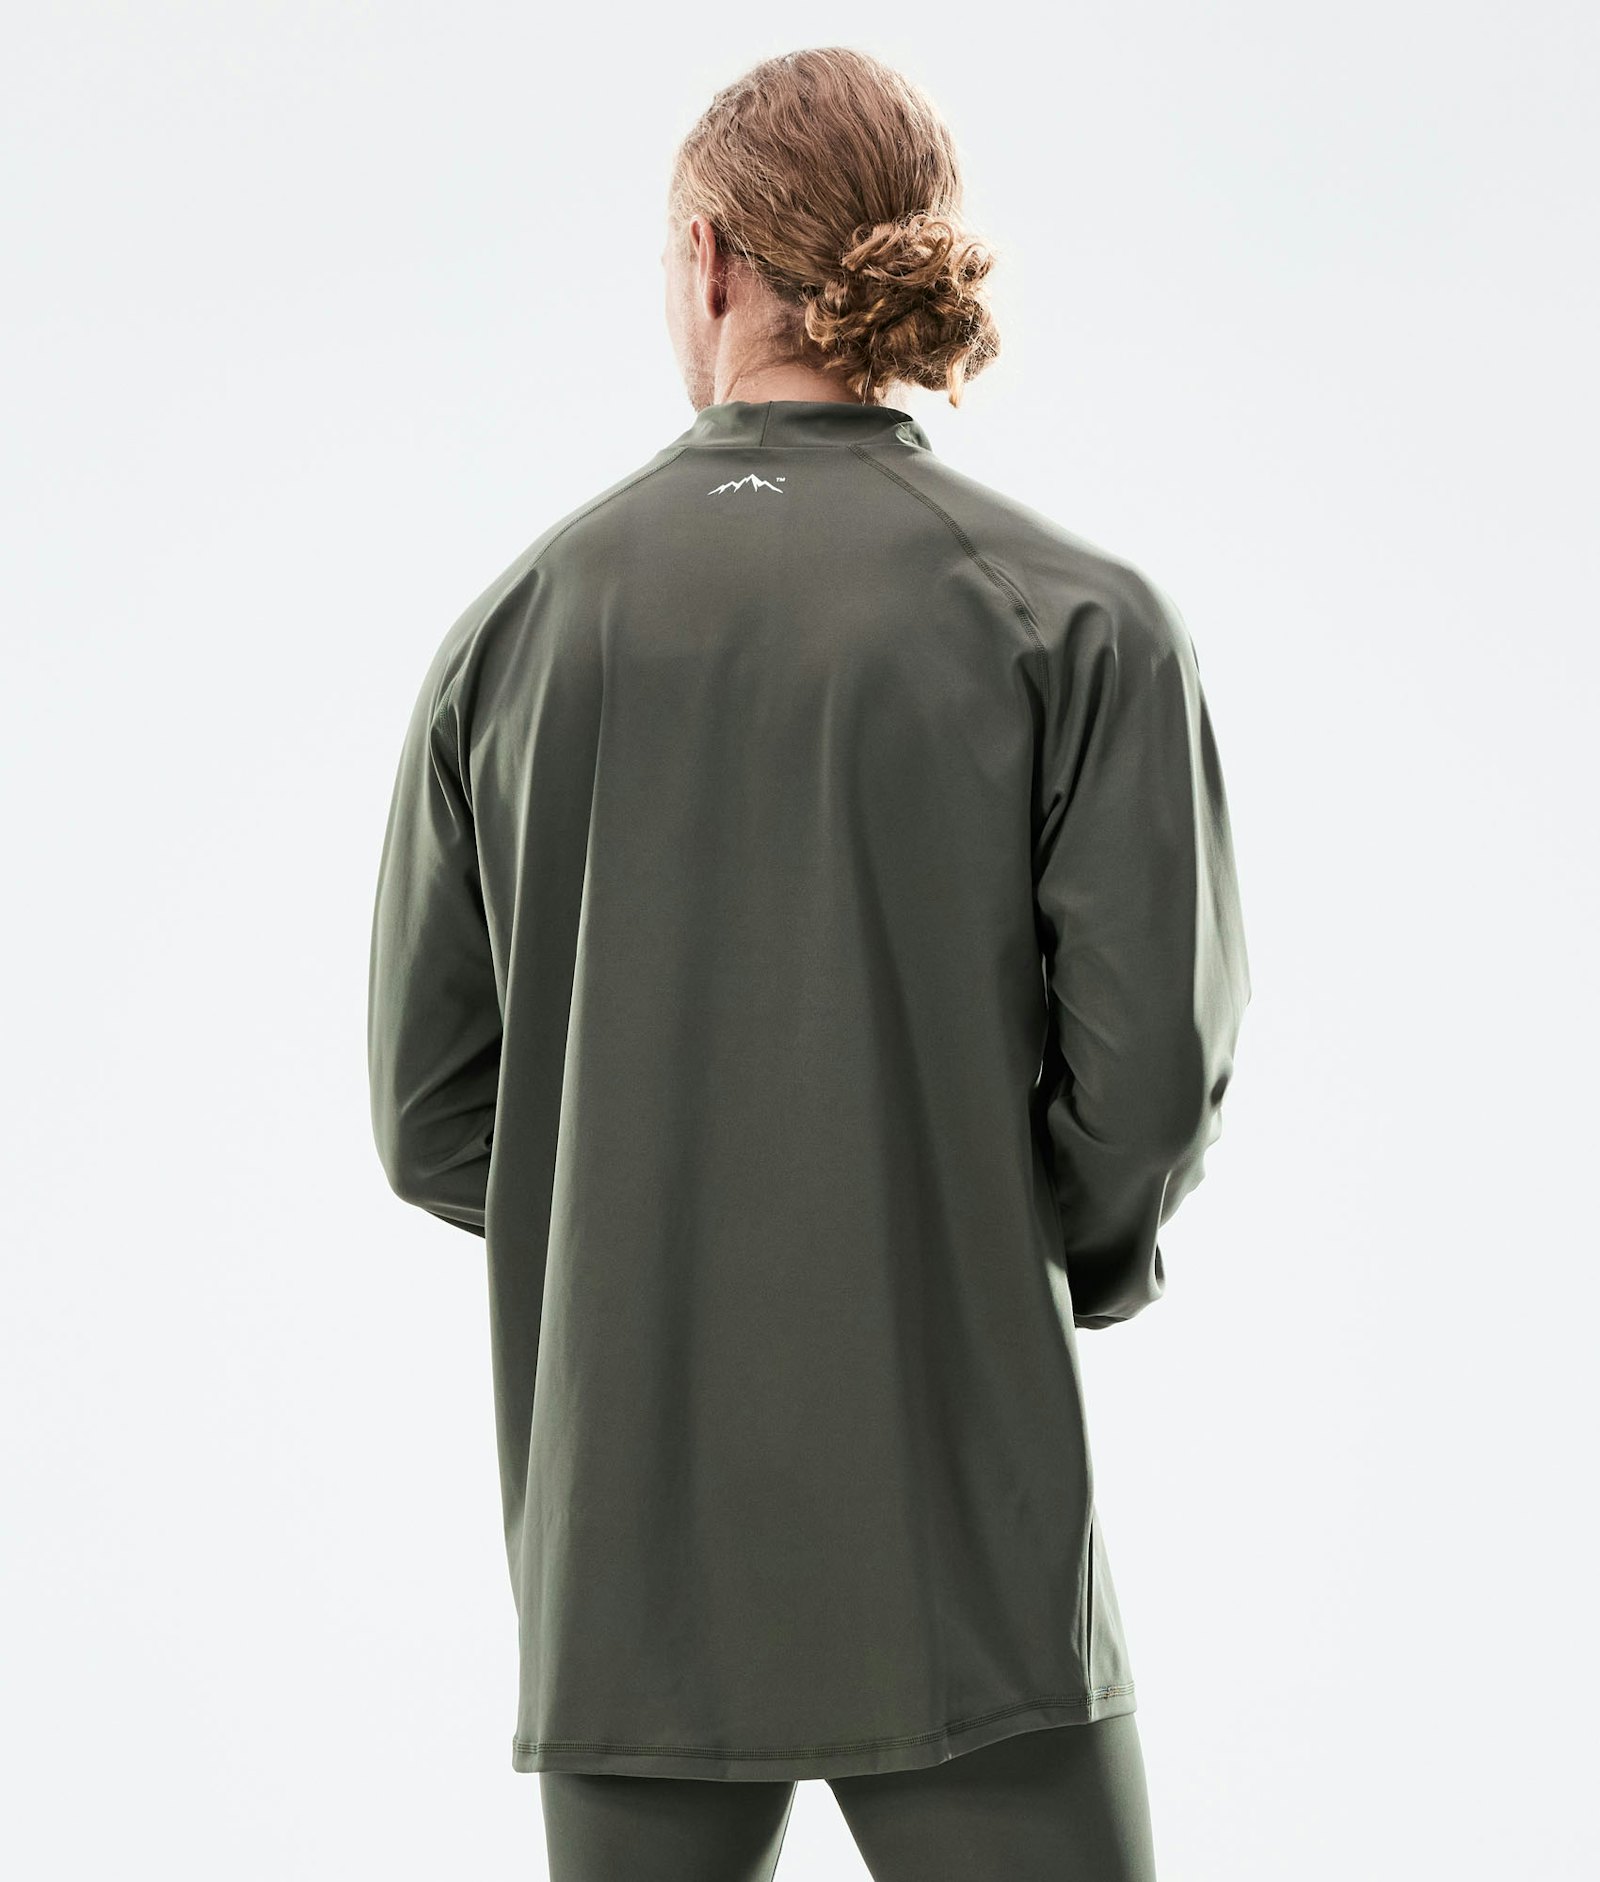 Snuggle Base Layer Top Men 2X-Up Olive Green